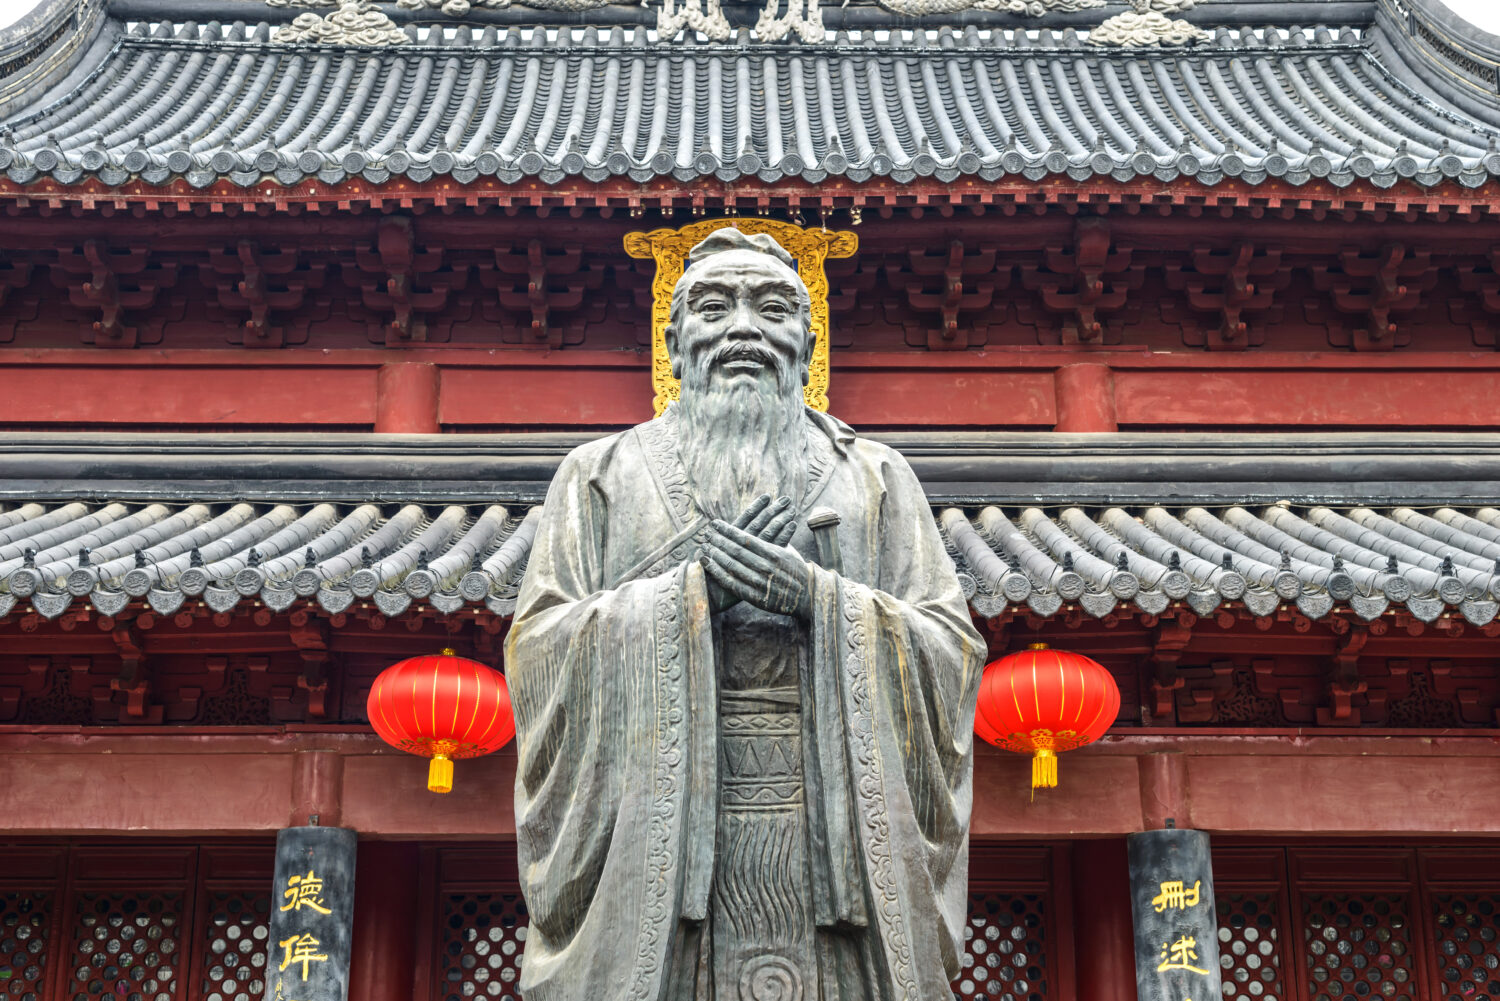 the role of women in Confucianism